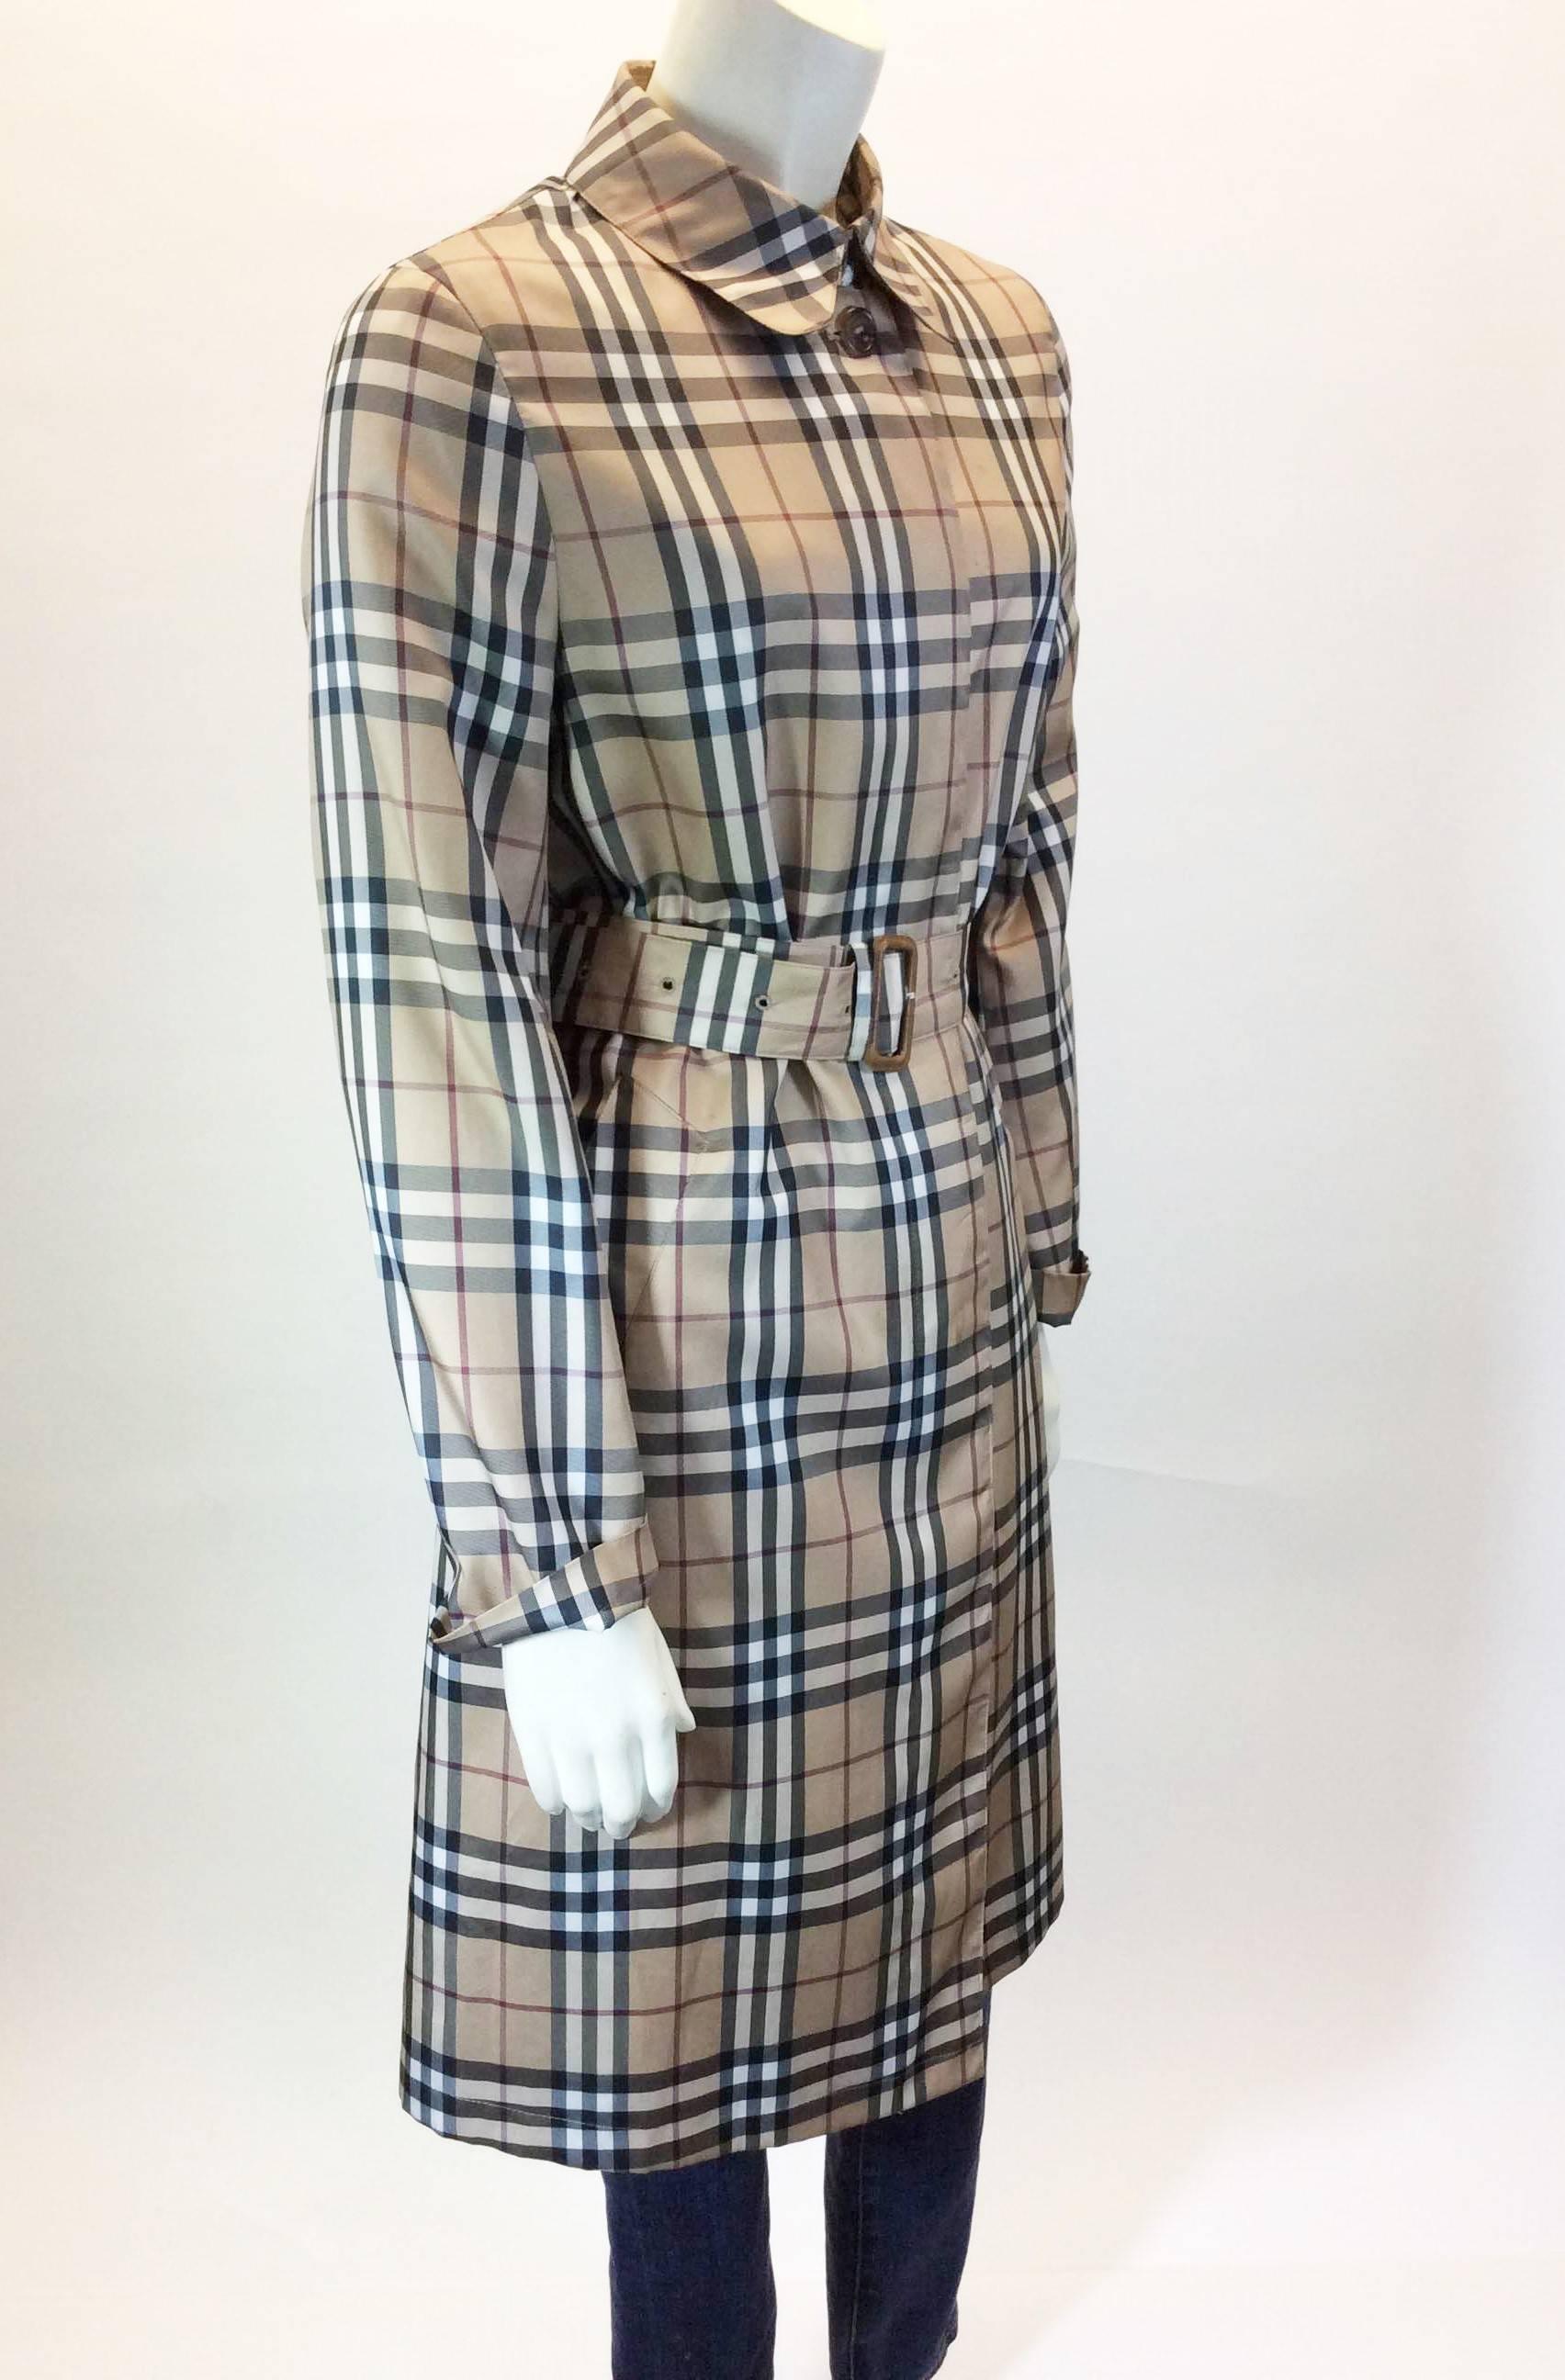 Burberry Iconic Plaid Rain Trench Coat
Adjustable Buckle for Wrap Around Waist
Hidden Buttons for Closure on Inside
Minor Staining on Left Lapel and along Interior Edges
(Shown in Pictures)
100% Polyester
24